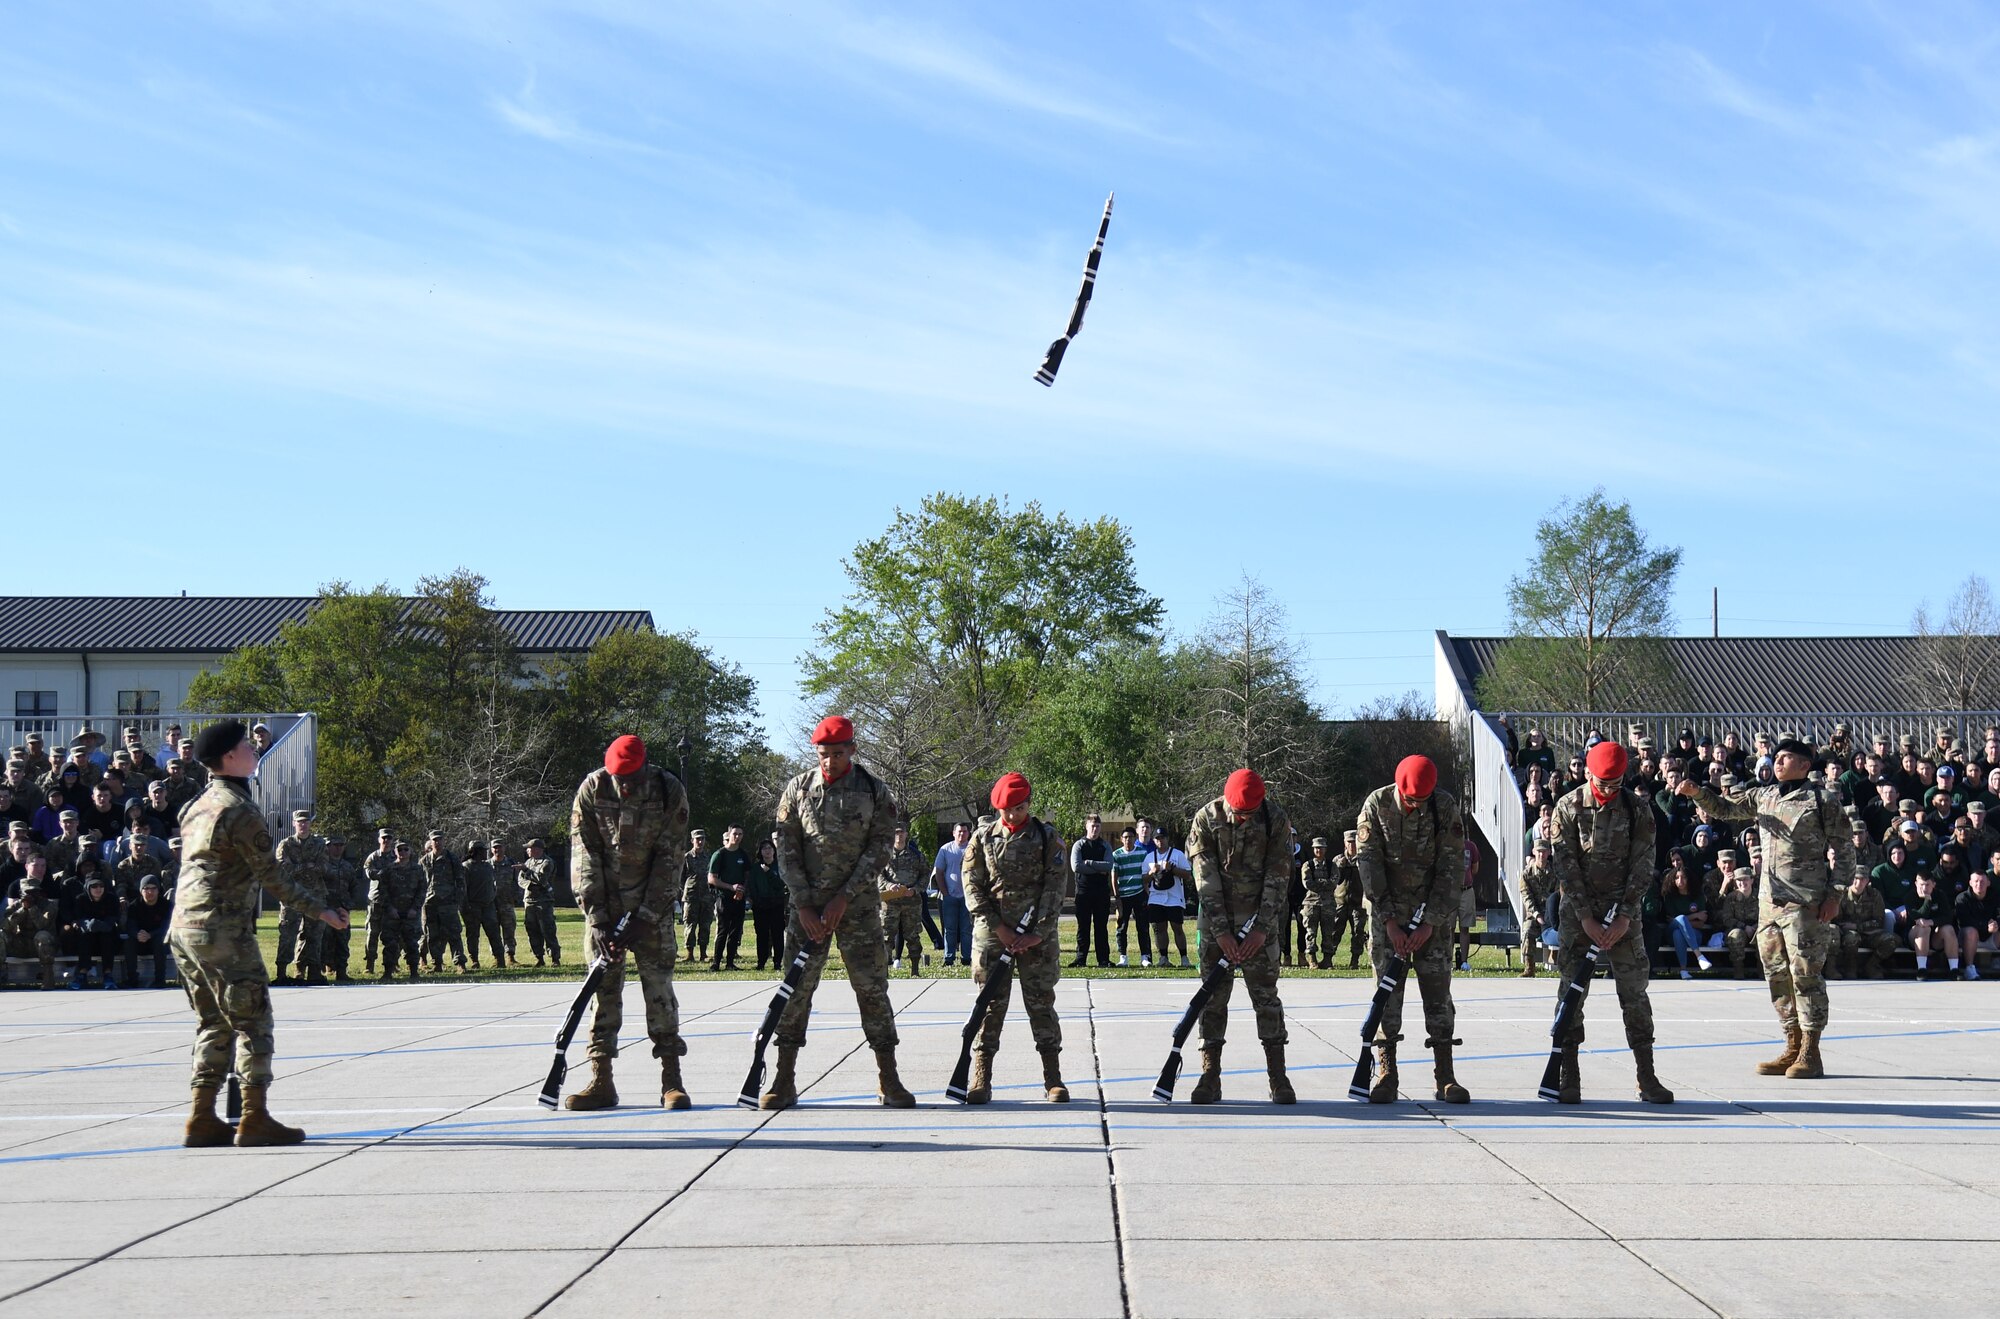 Members of the 336th Training Squadron freestyle drill team perform during the 81st Training Group drill down on the Levitow Training Support Facility drill pad at Keesler Air Force Base, Mississippi, April 1, 2022. Keesler trains more than 30,000 students each year. While in training, Airmen are given the opportunity to volunteer to learn and execute drill down routines. (U.S. Air Force photo by Kemberly Groue)